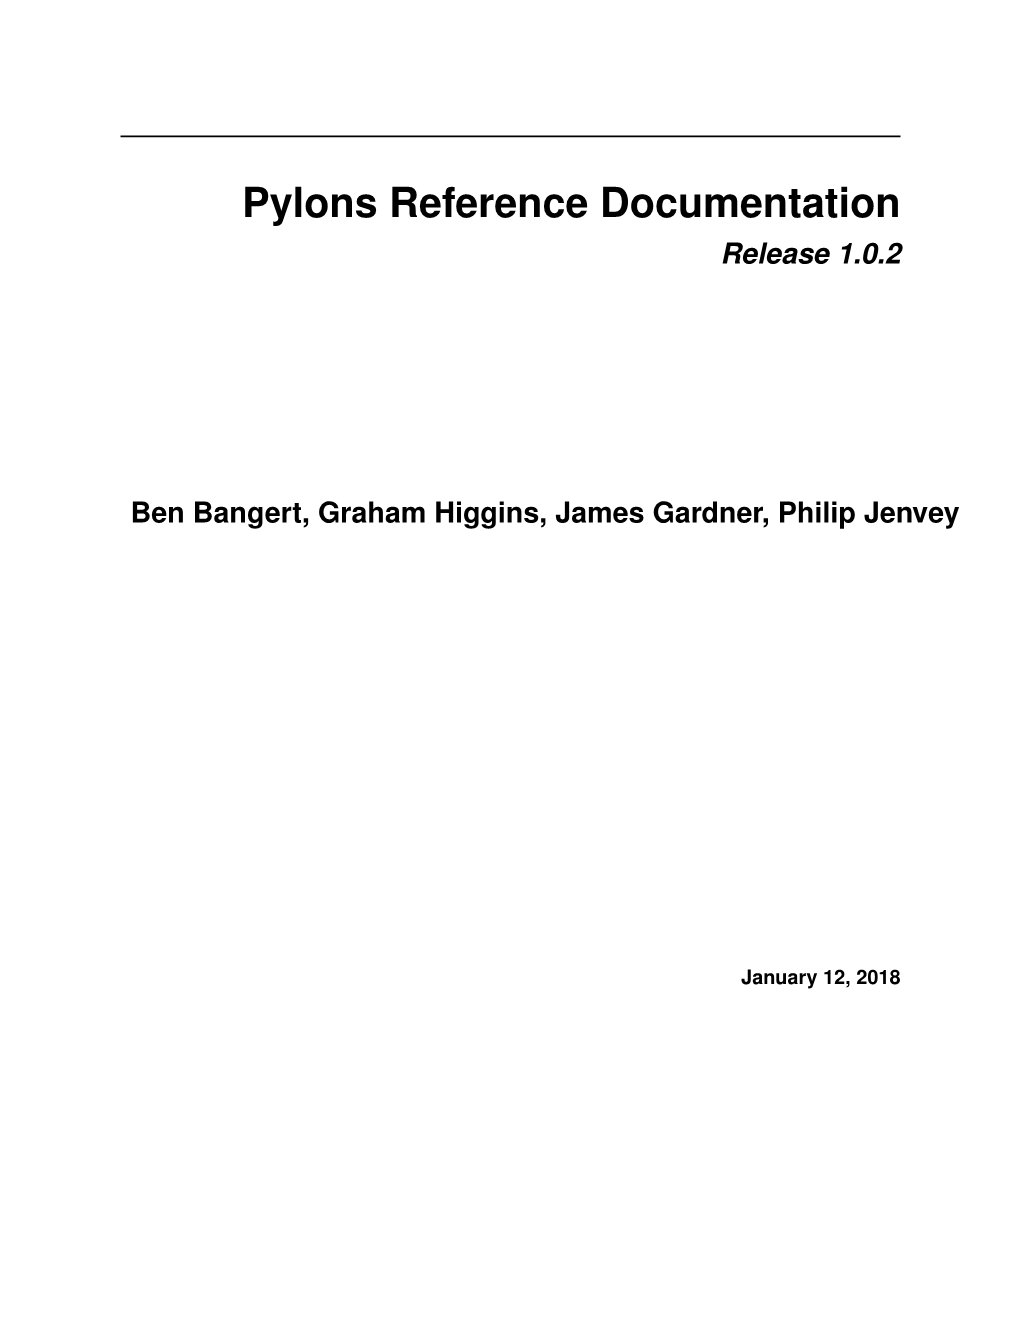 Pylons Reference Documentation Release 1.0.2